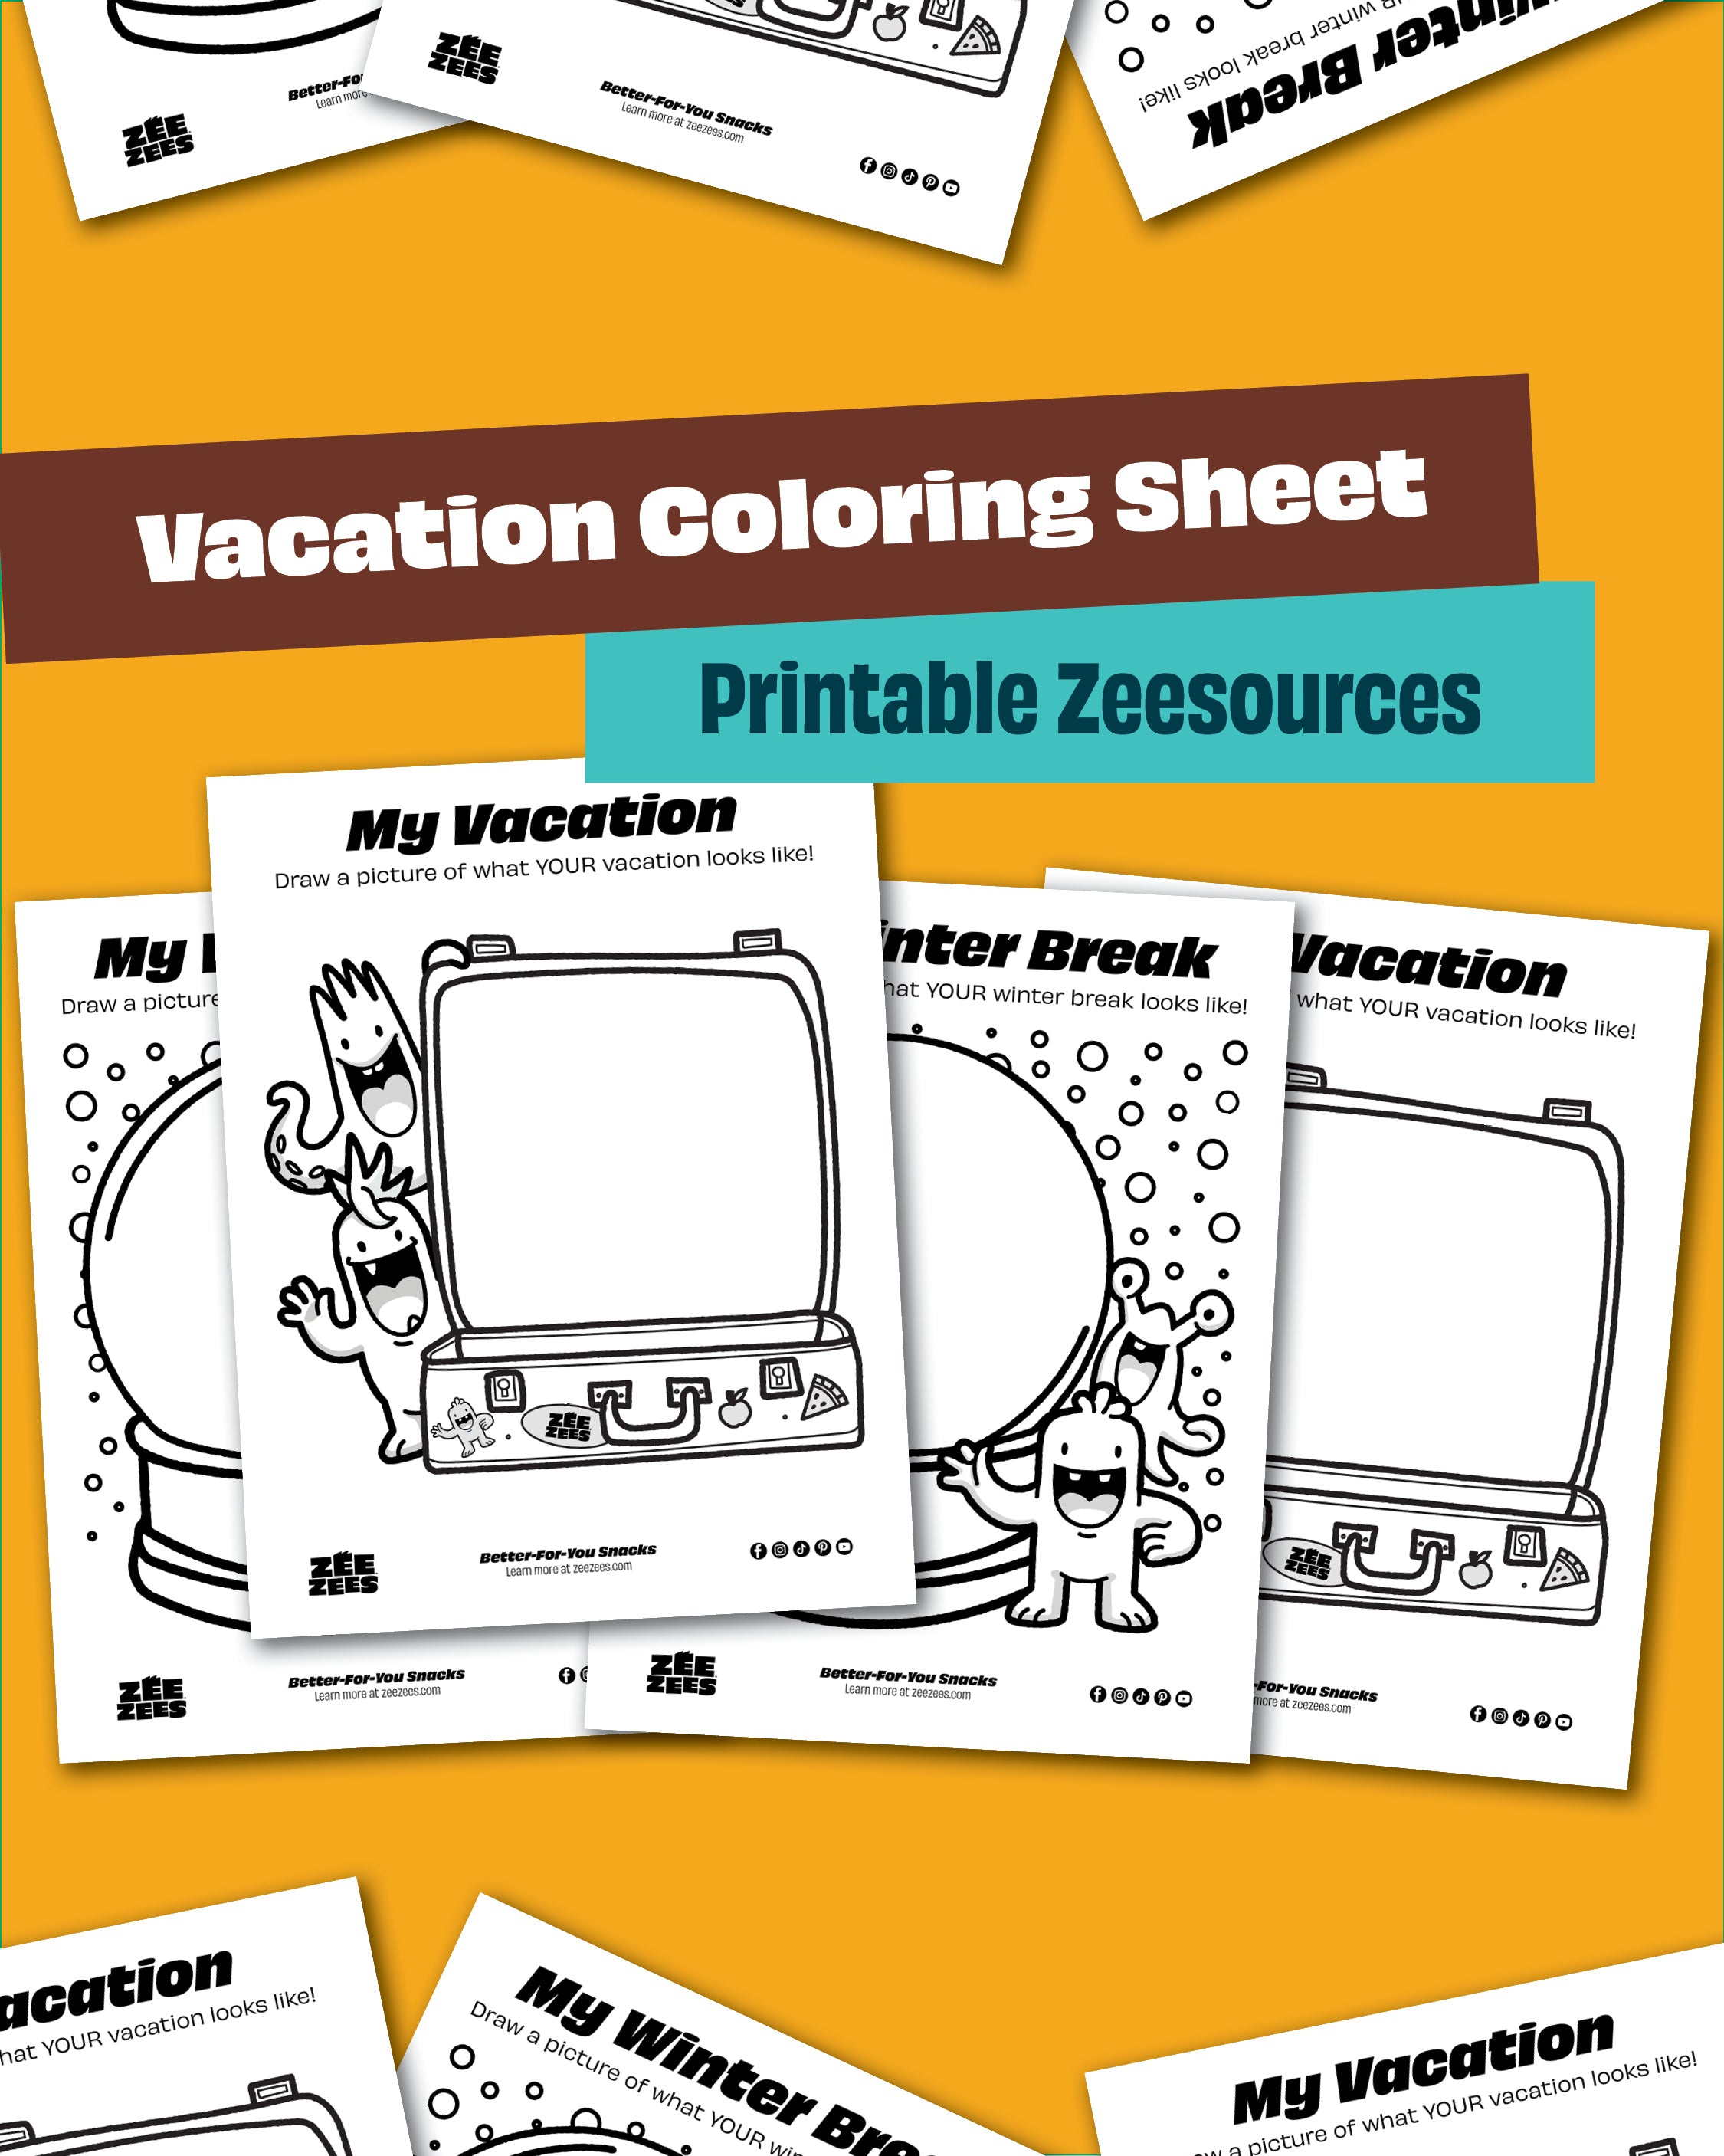 Zee Zees Free Downloads - Vacation Coloring Sheets